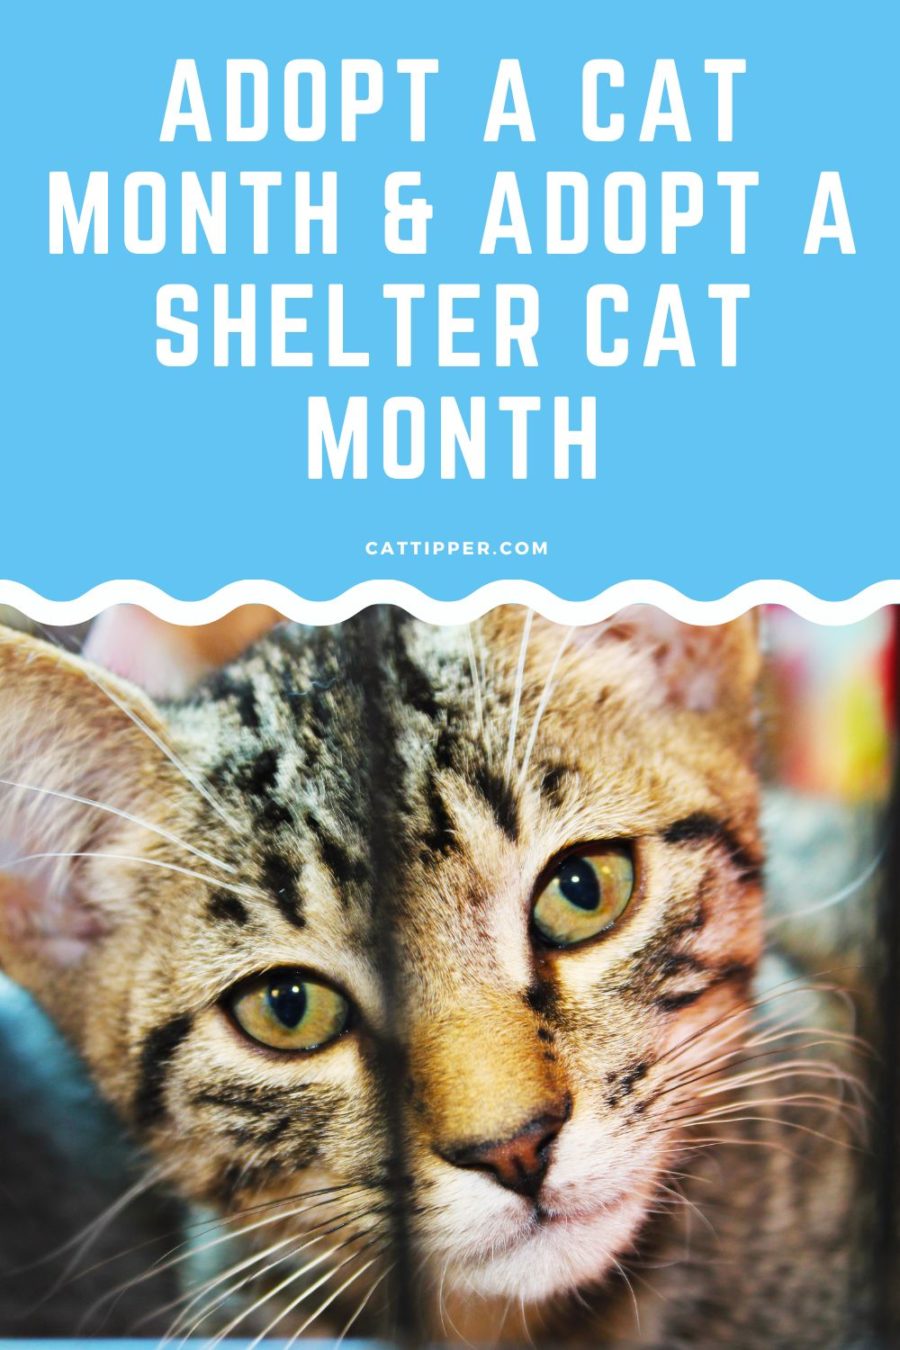 Adopt A Cat Month and Adopt a Shelter Cat Month